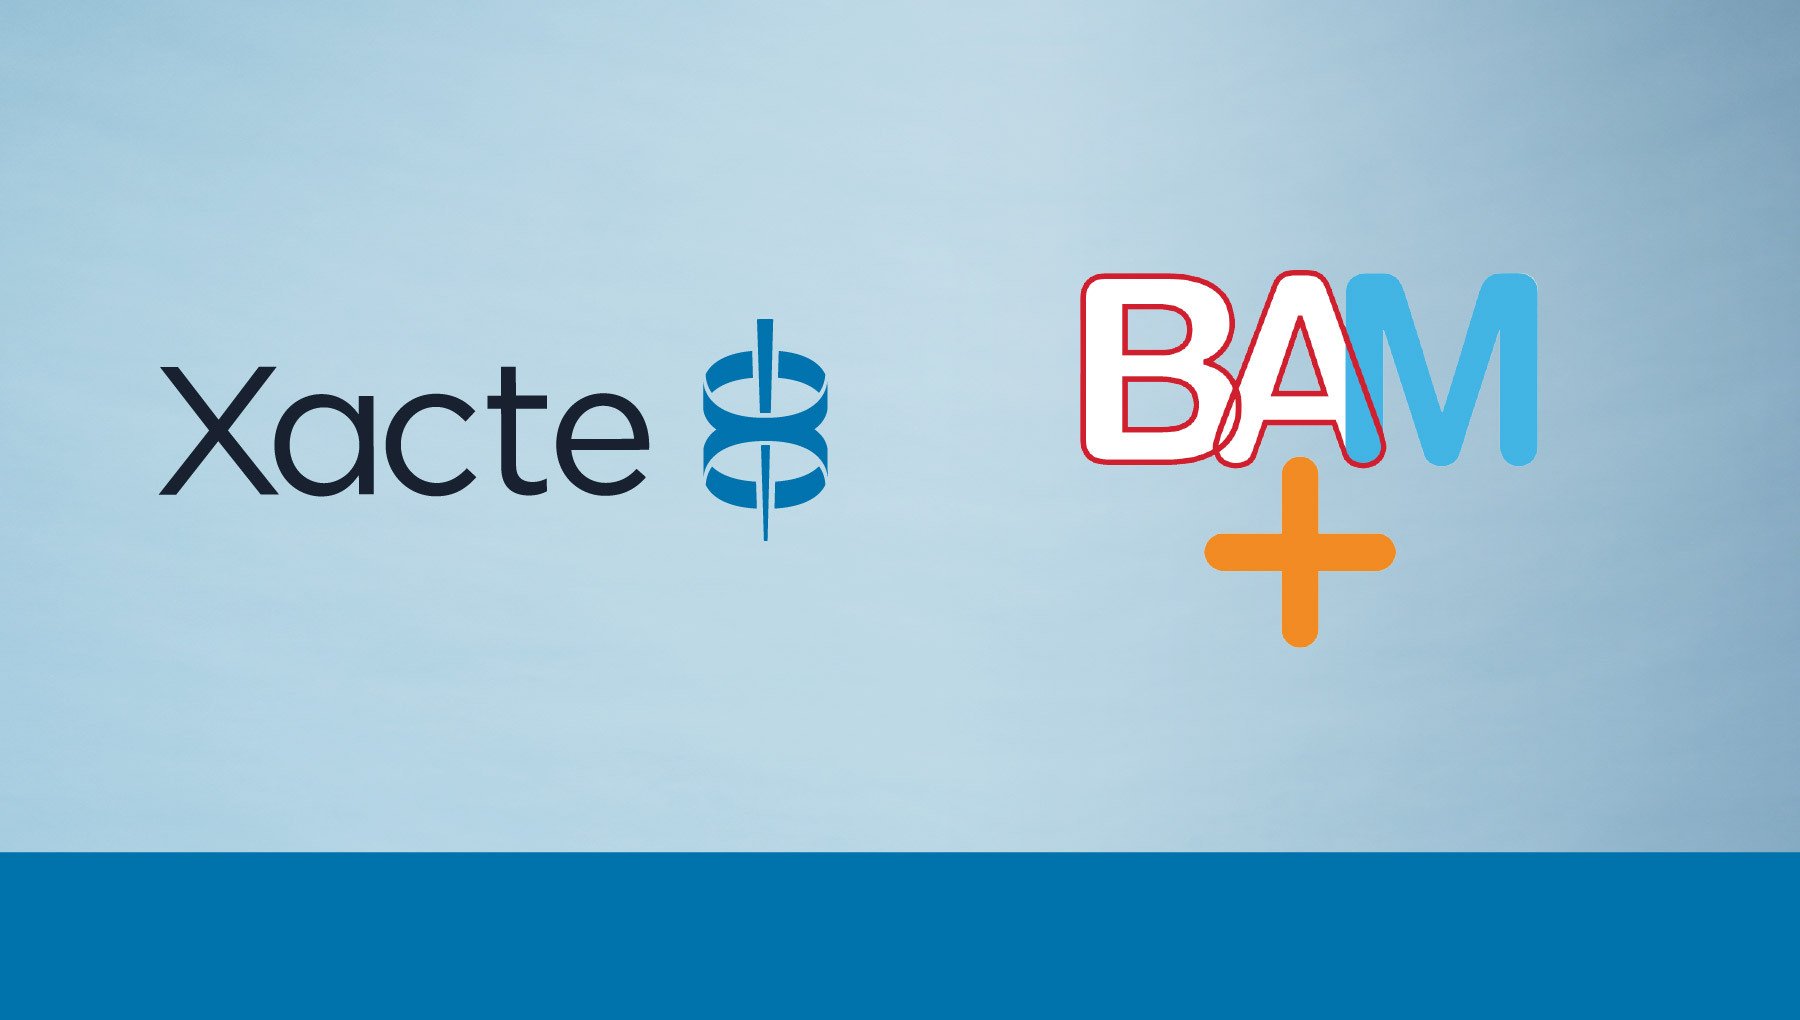 Acquisition of BAM by Xacte